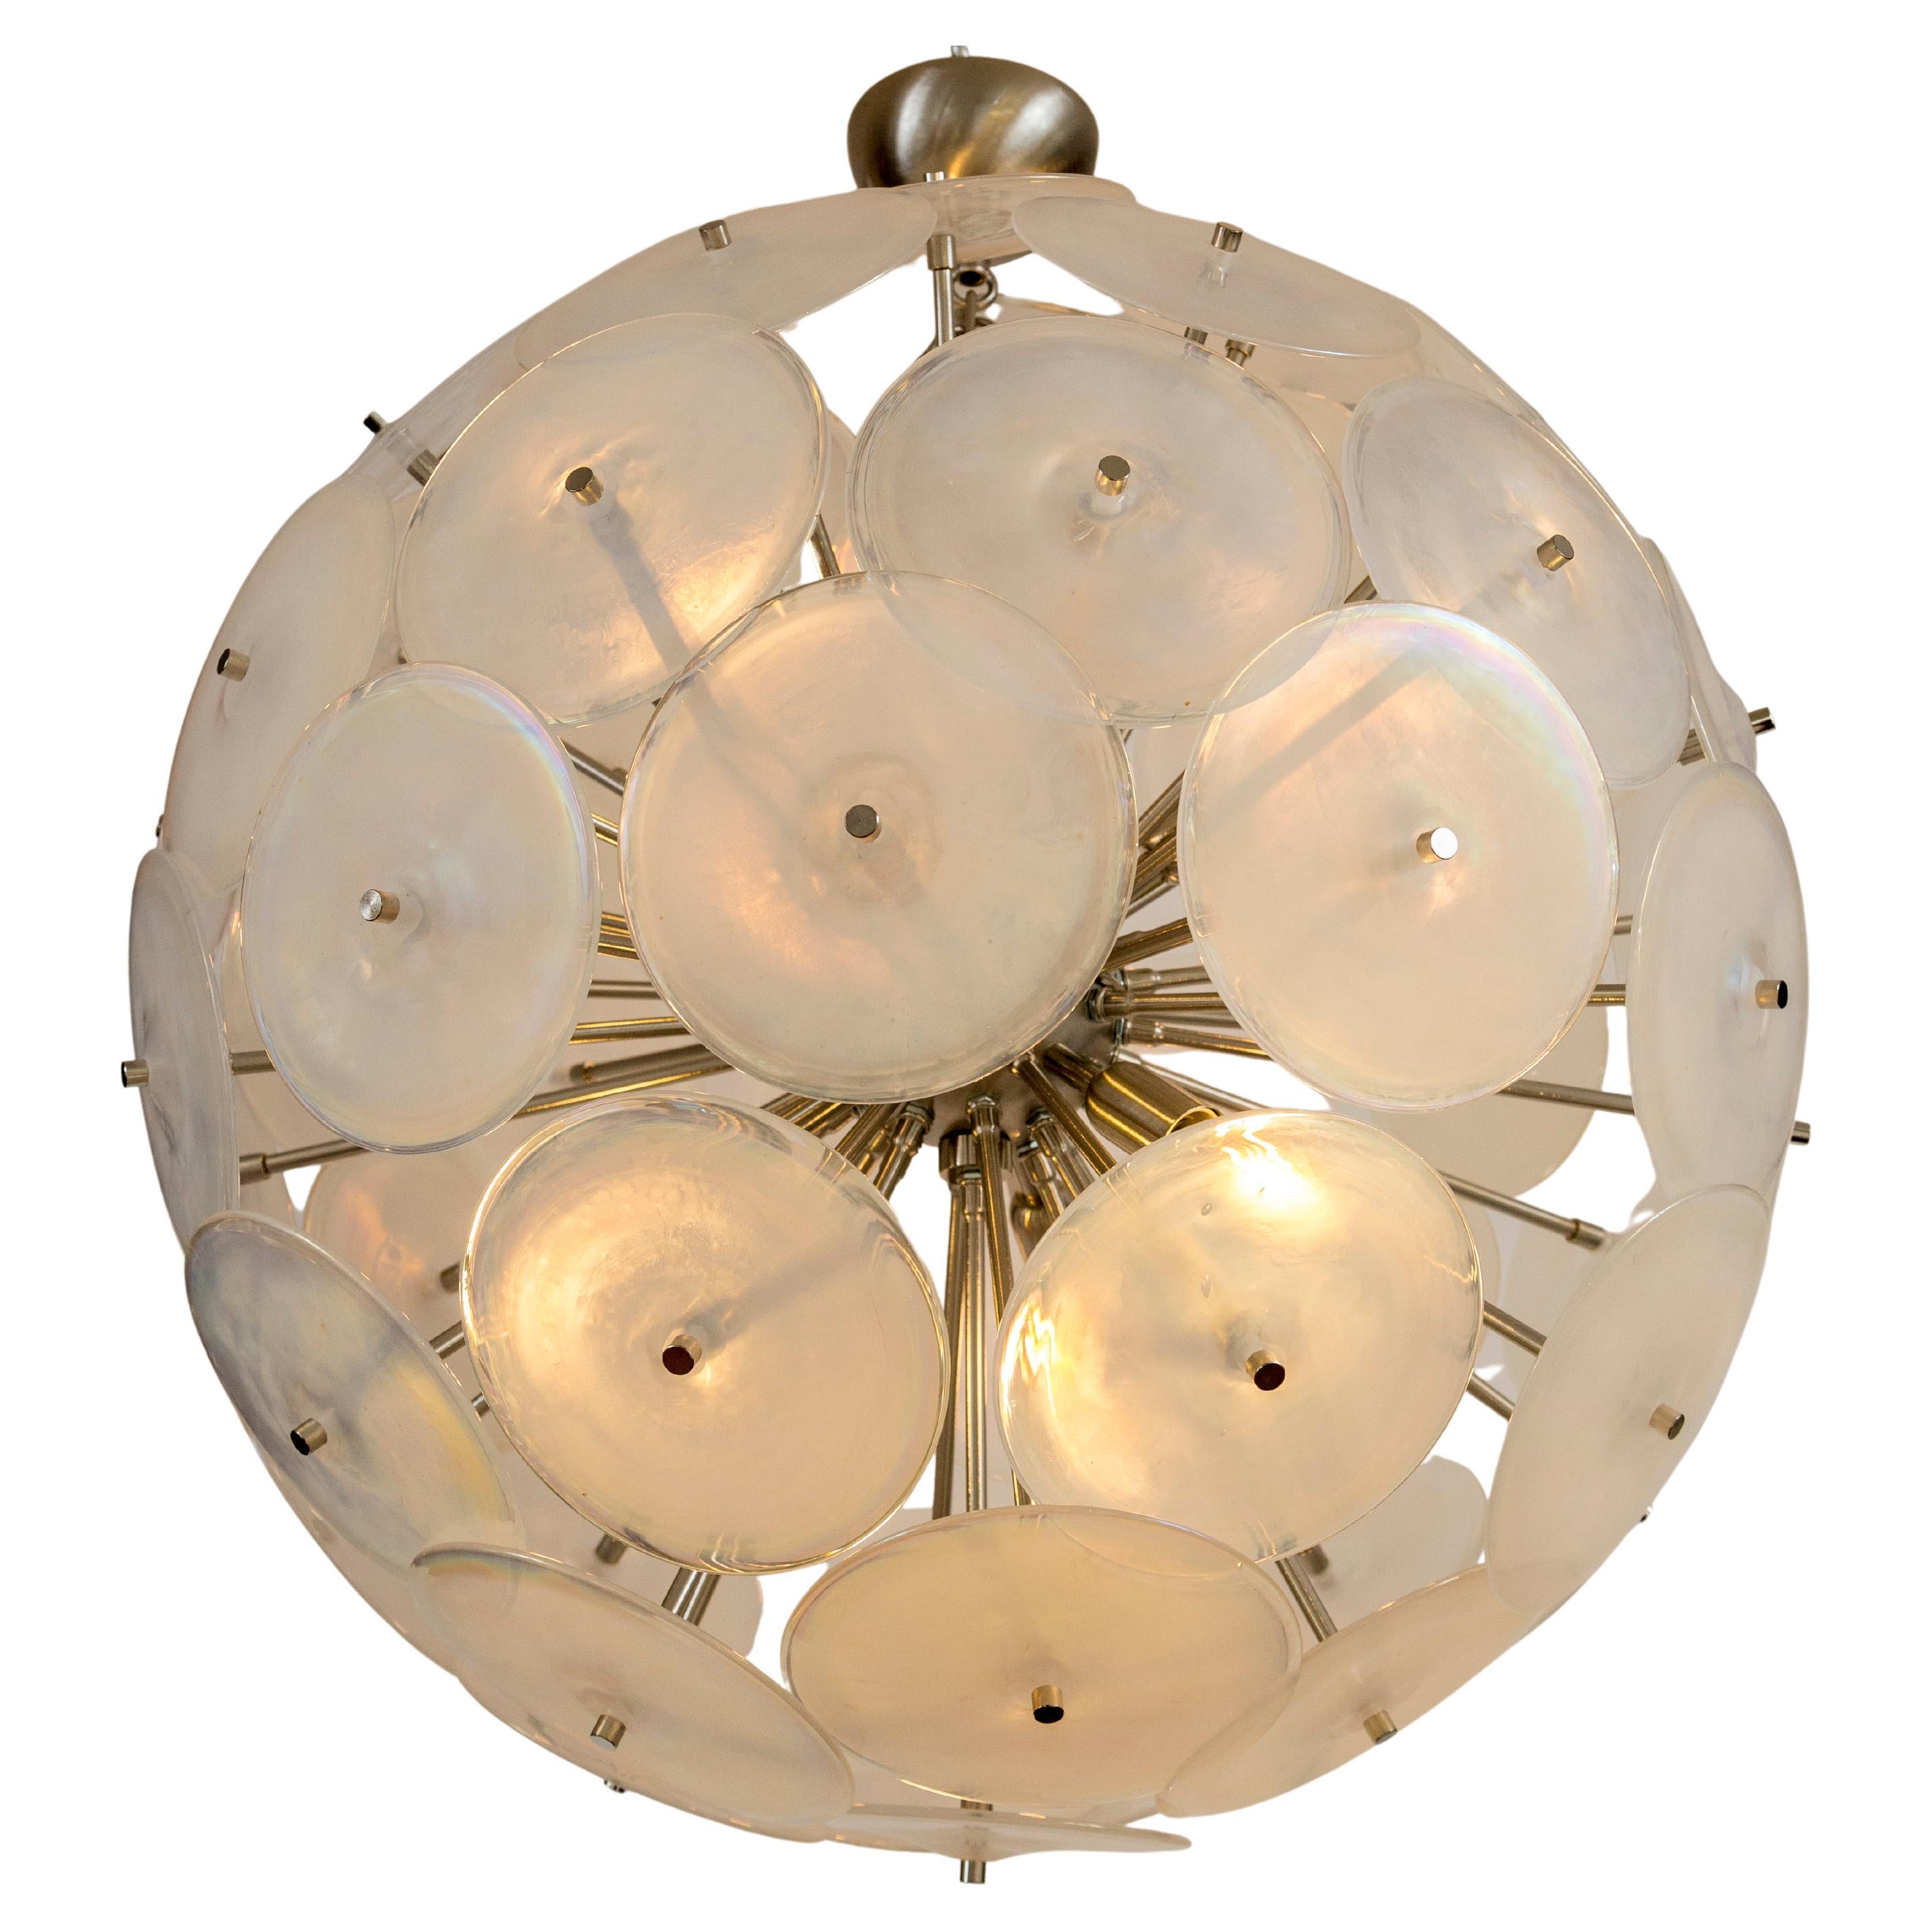 30 thickly blown iridescent white discs with clear glass edges comprise this matte nickel on brass Sputnik frame, illuminated with 6 candelabra bulbs to your desired overall drop of up to 54